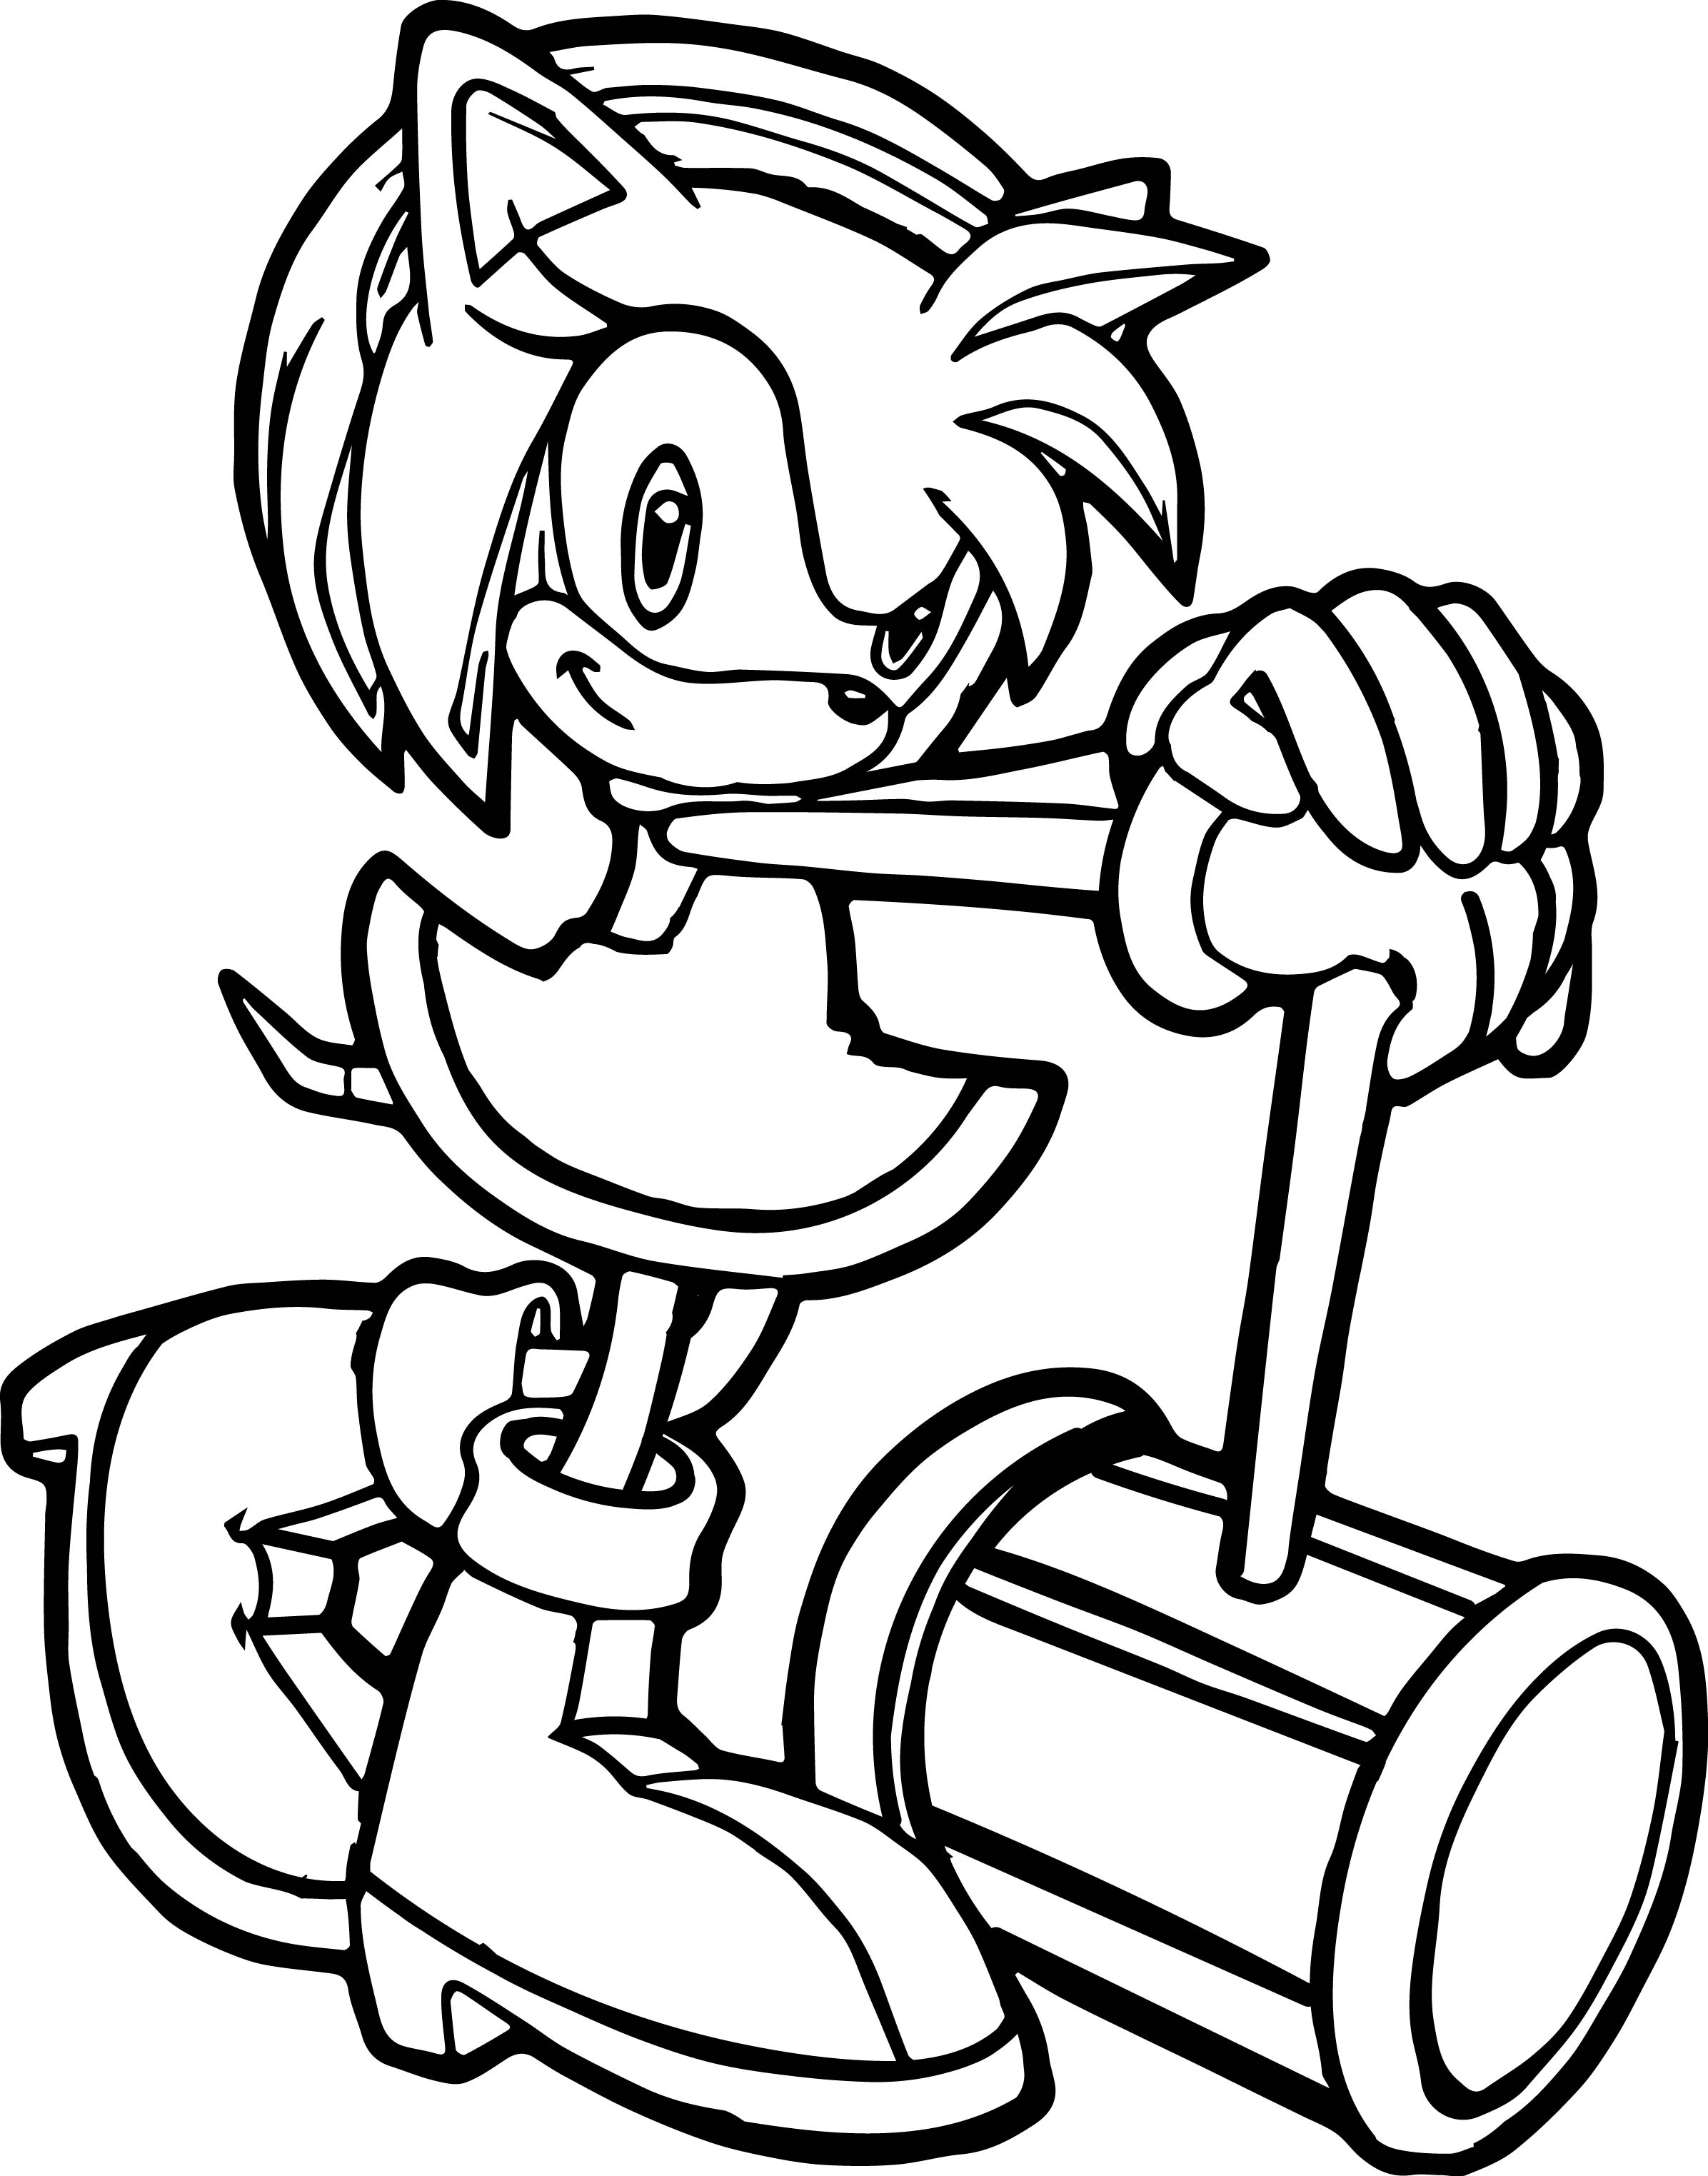 sonic-and-amy-coloring-pages-at-getcolorings-free-printable-colorings-pages-to-print-and-color